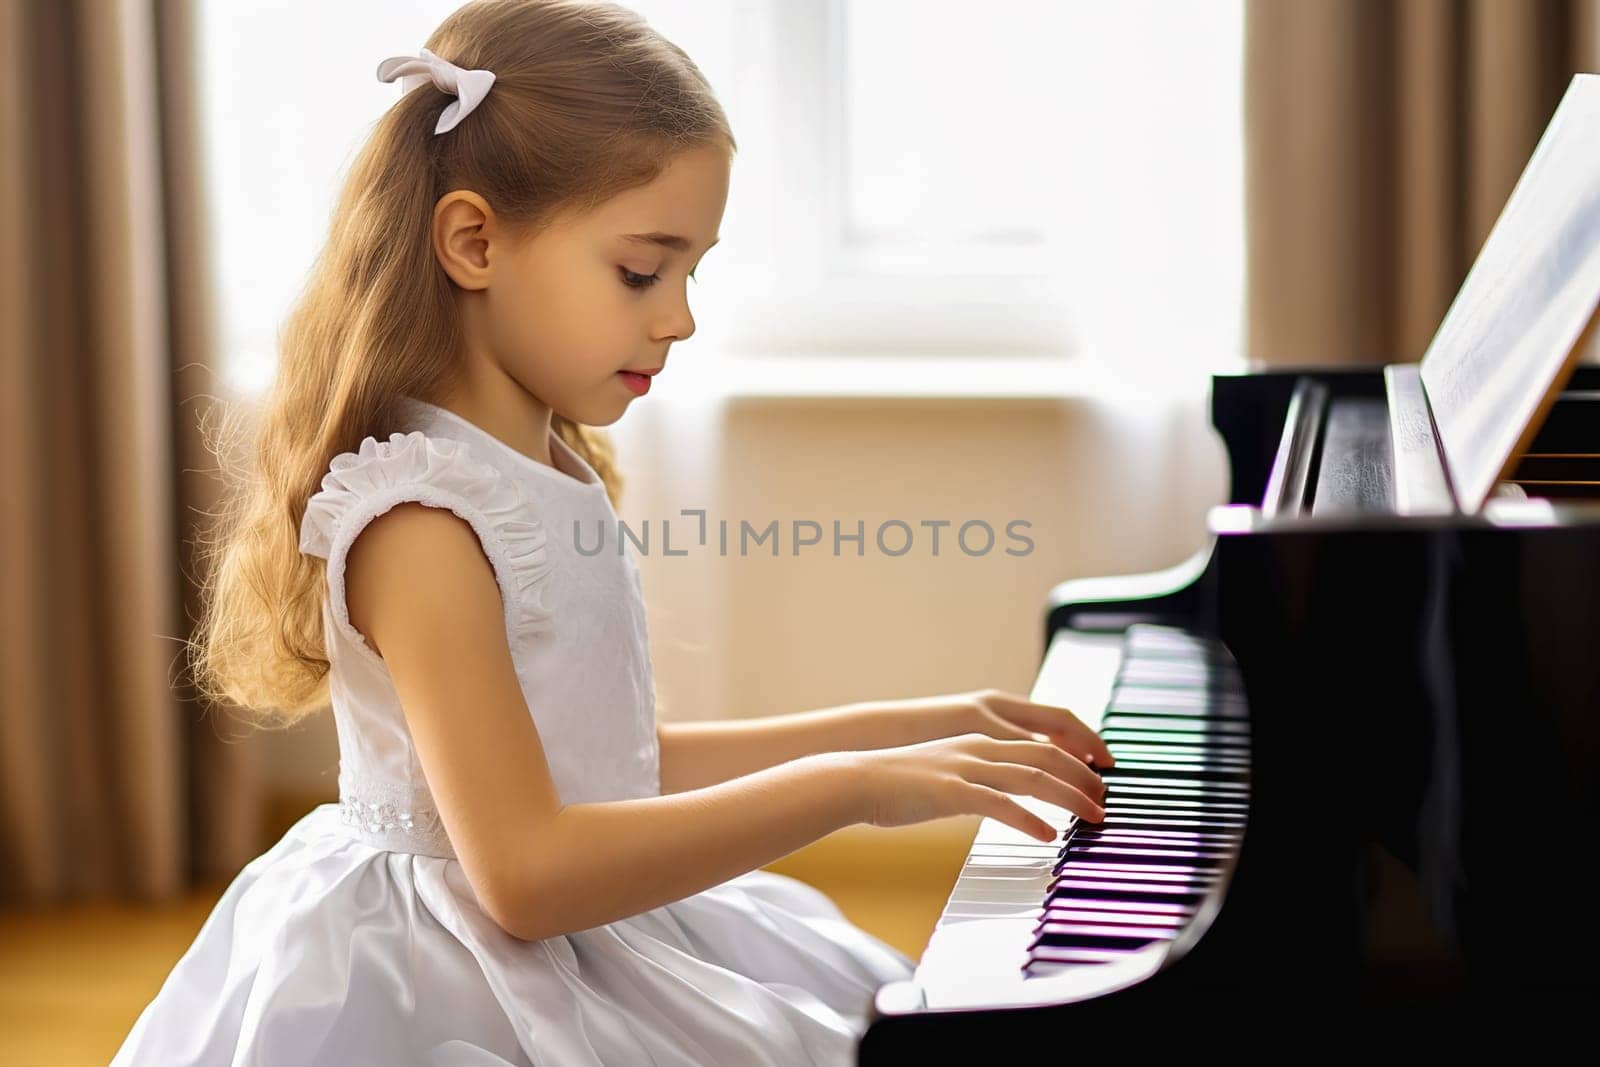 A little girl with long hair is learning to play the piano